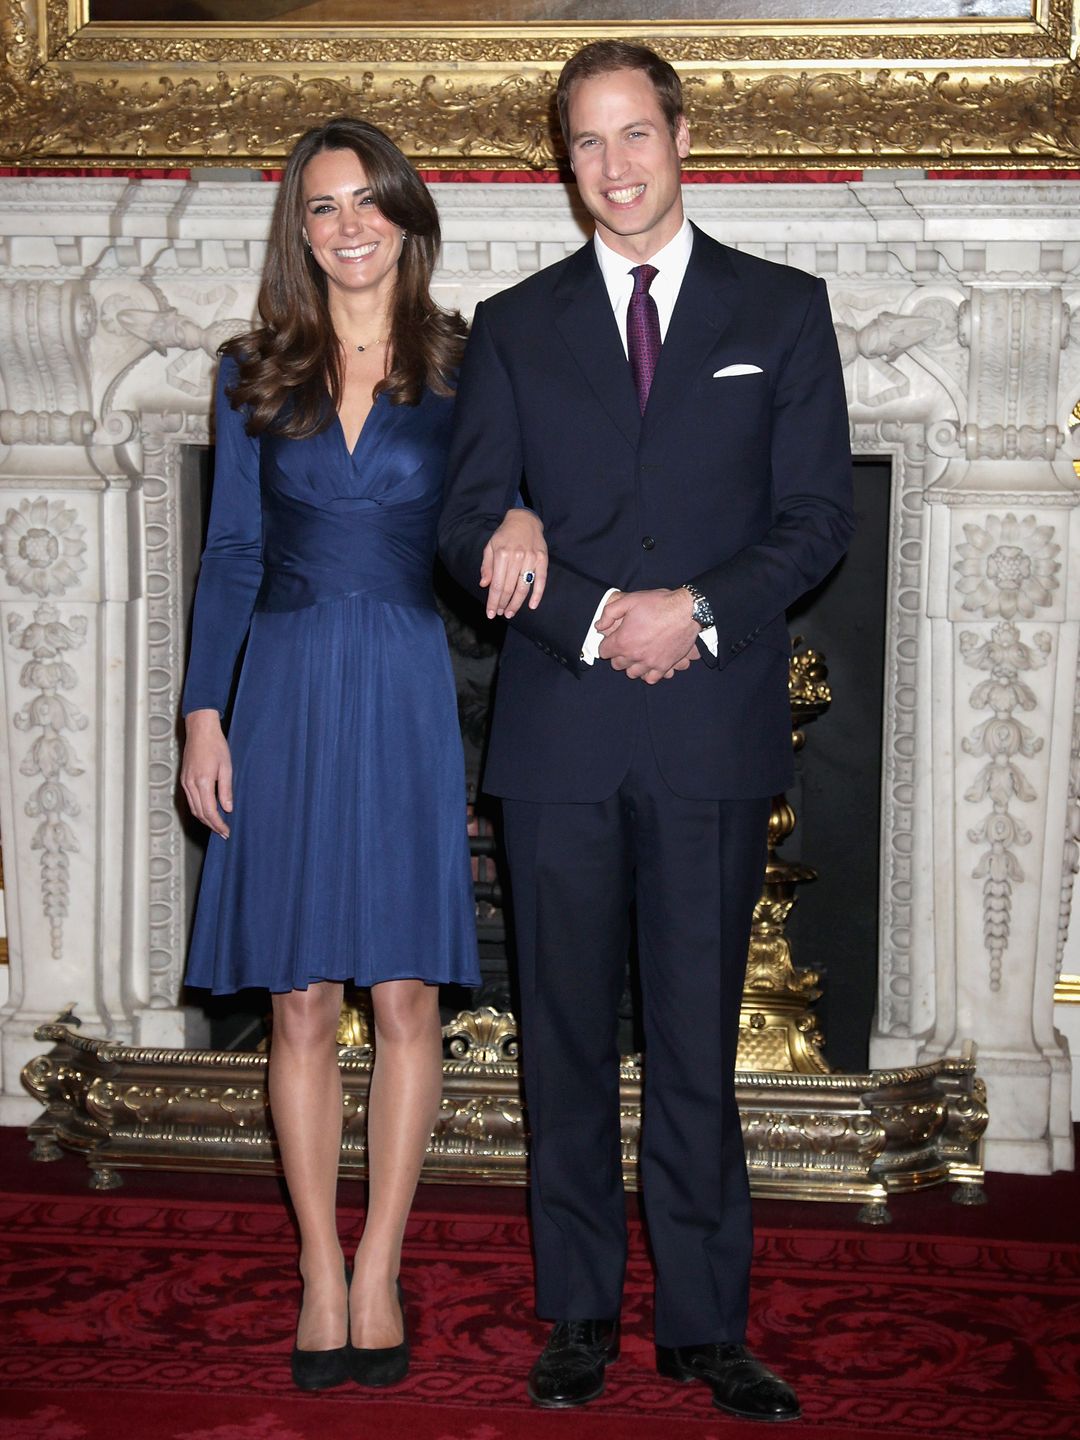 Prince William and Kate Middleton pose photographs in State Apartments